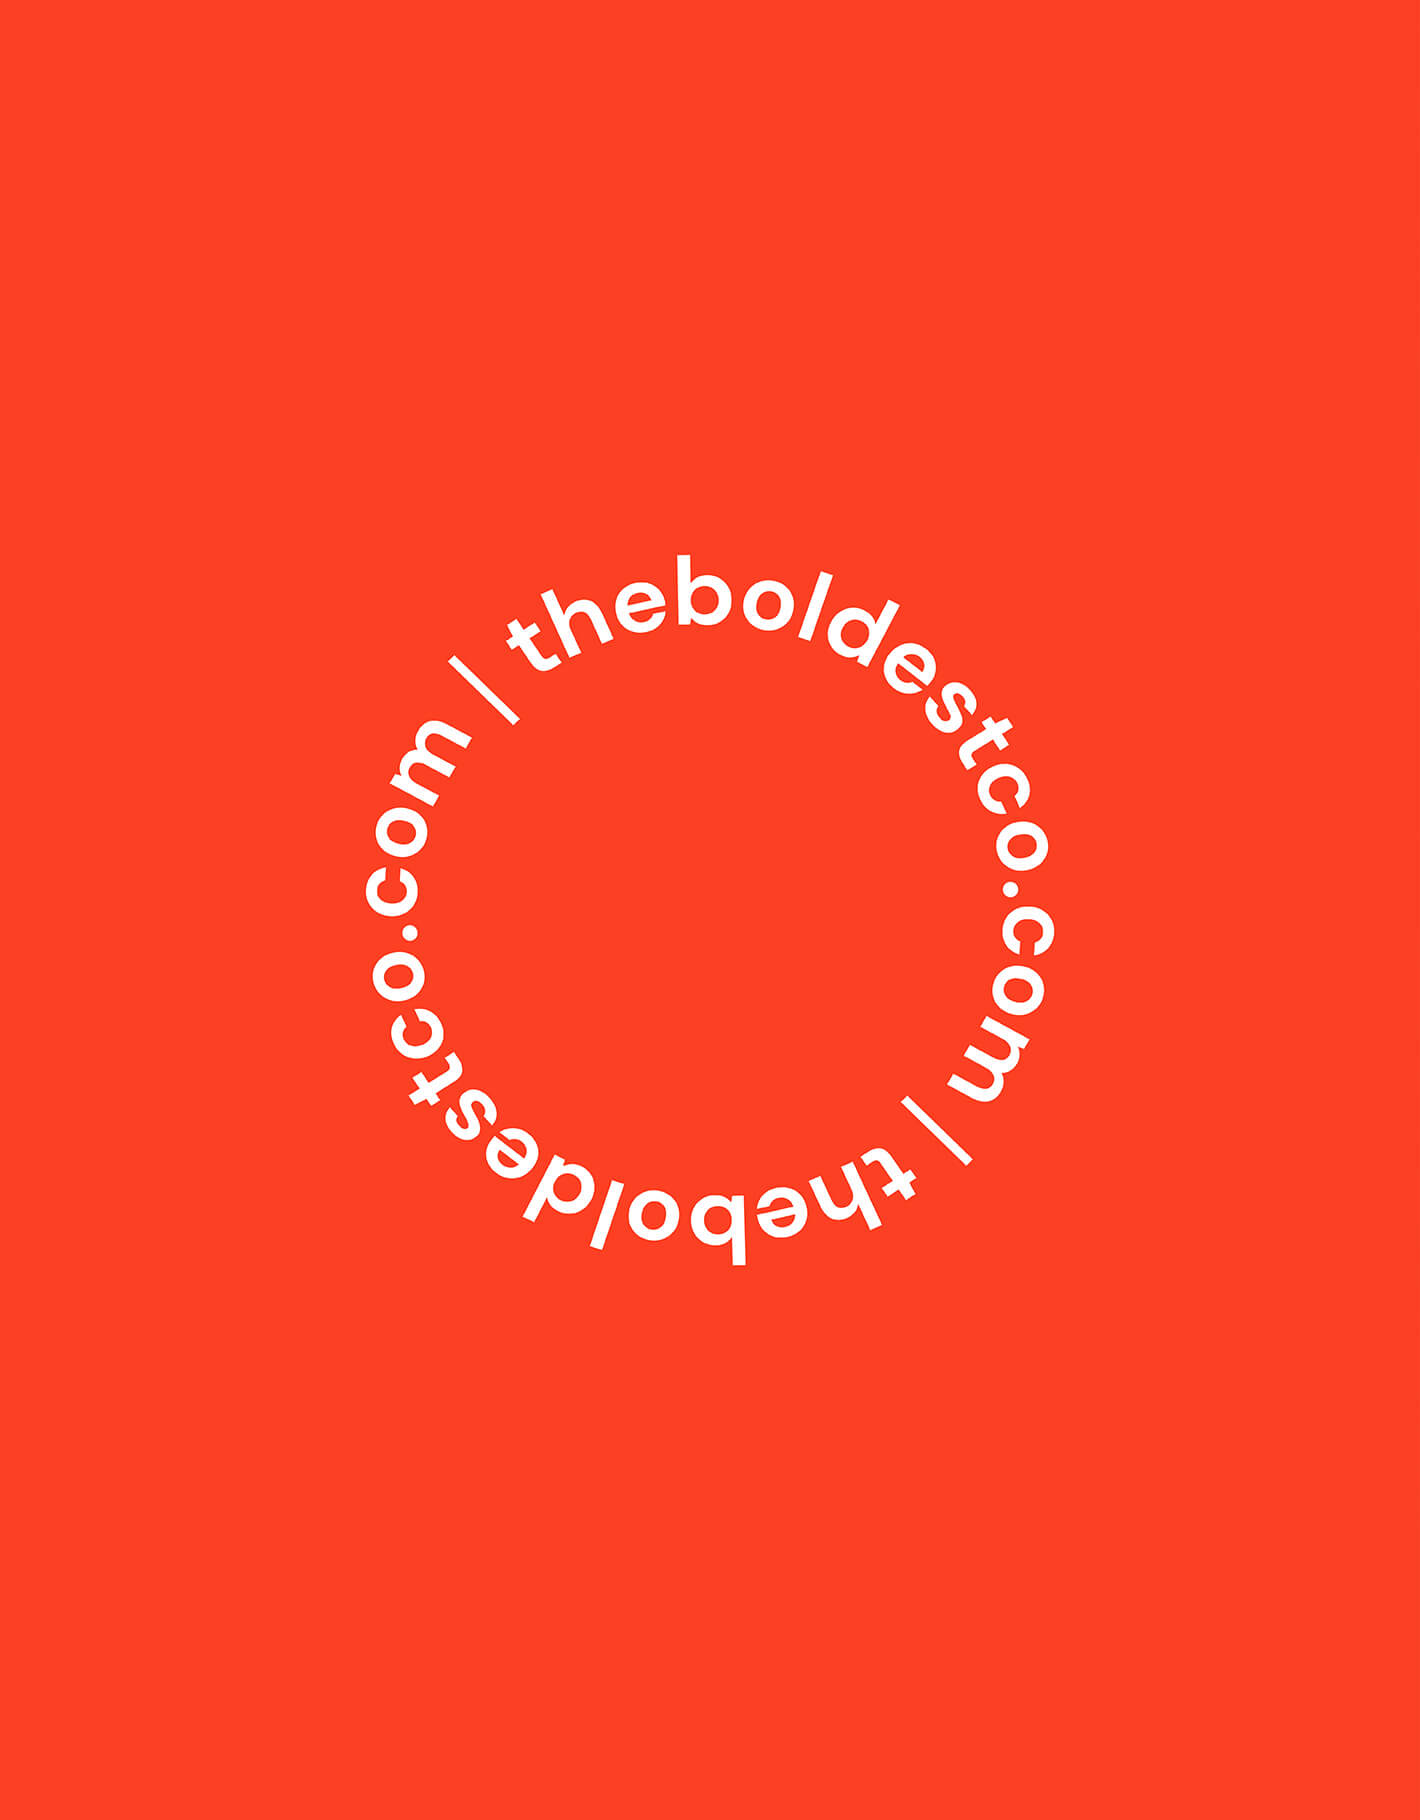 One of the The Boldest Co supporting brand marks shows the URL arranged in a circle on a bright red background.